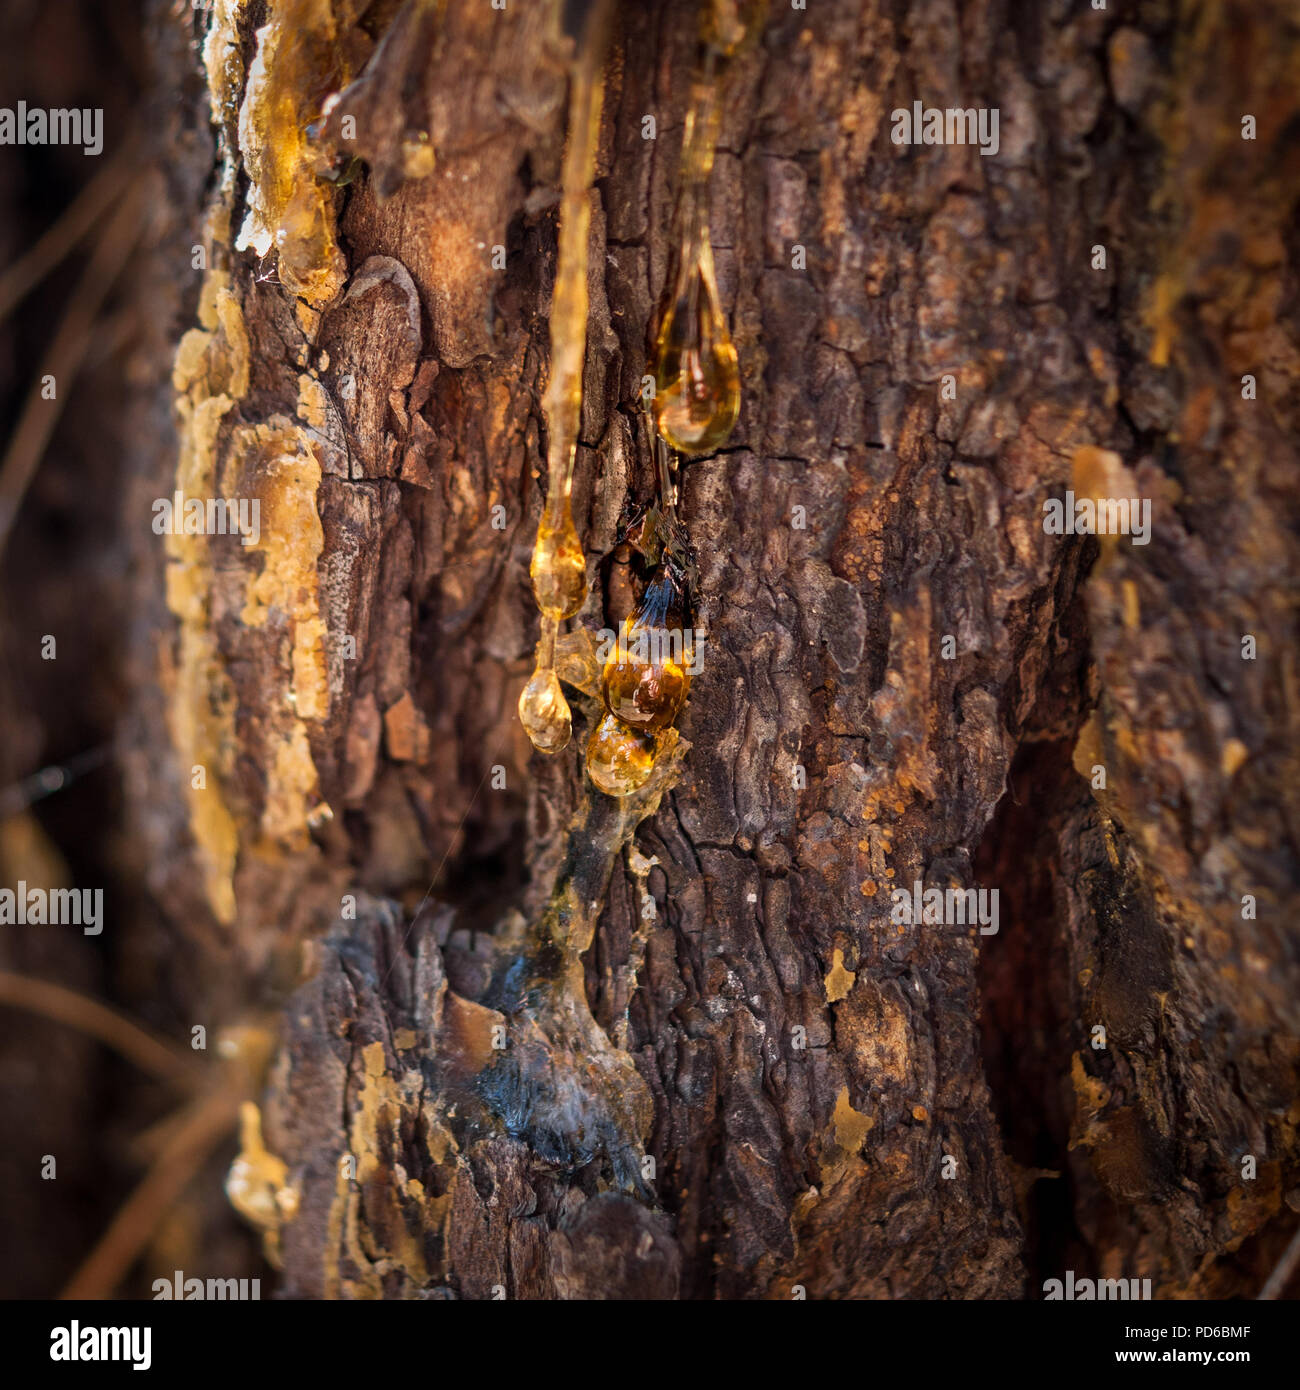 Organic life concept: leaking bright yellow drops of pine tar, resin, with a spider web on a dark tree bark background, sunny summer day Stock Photo